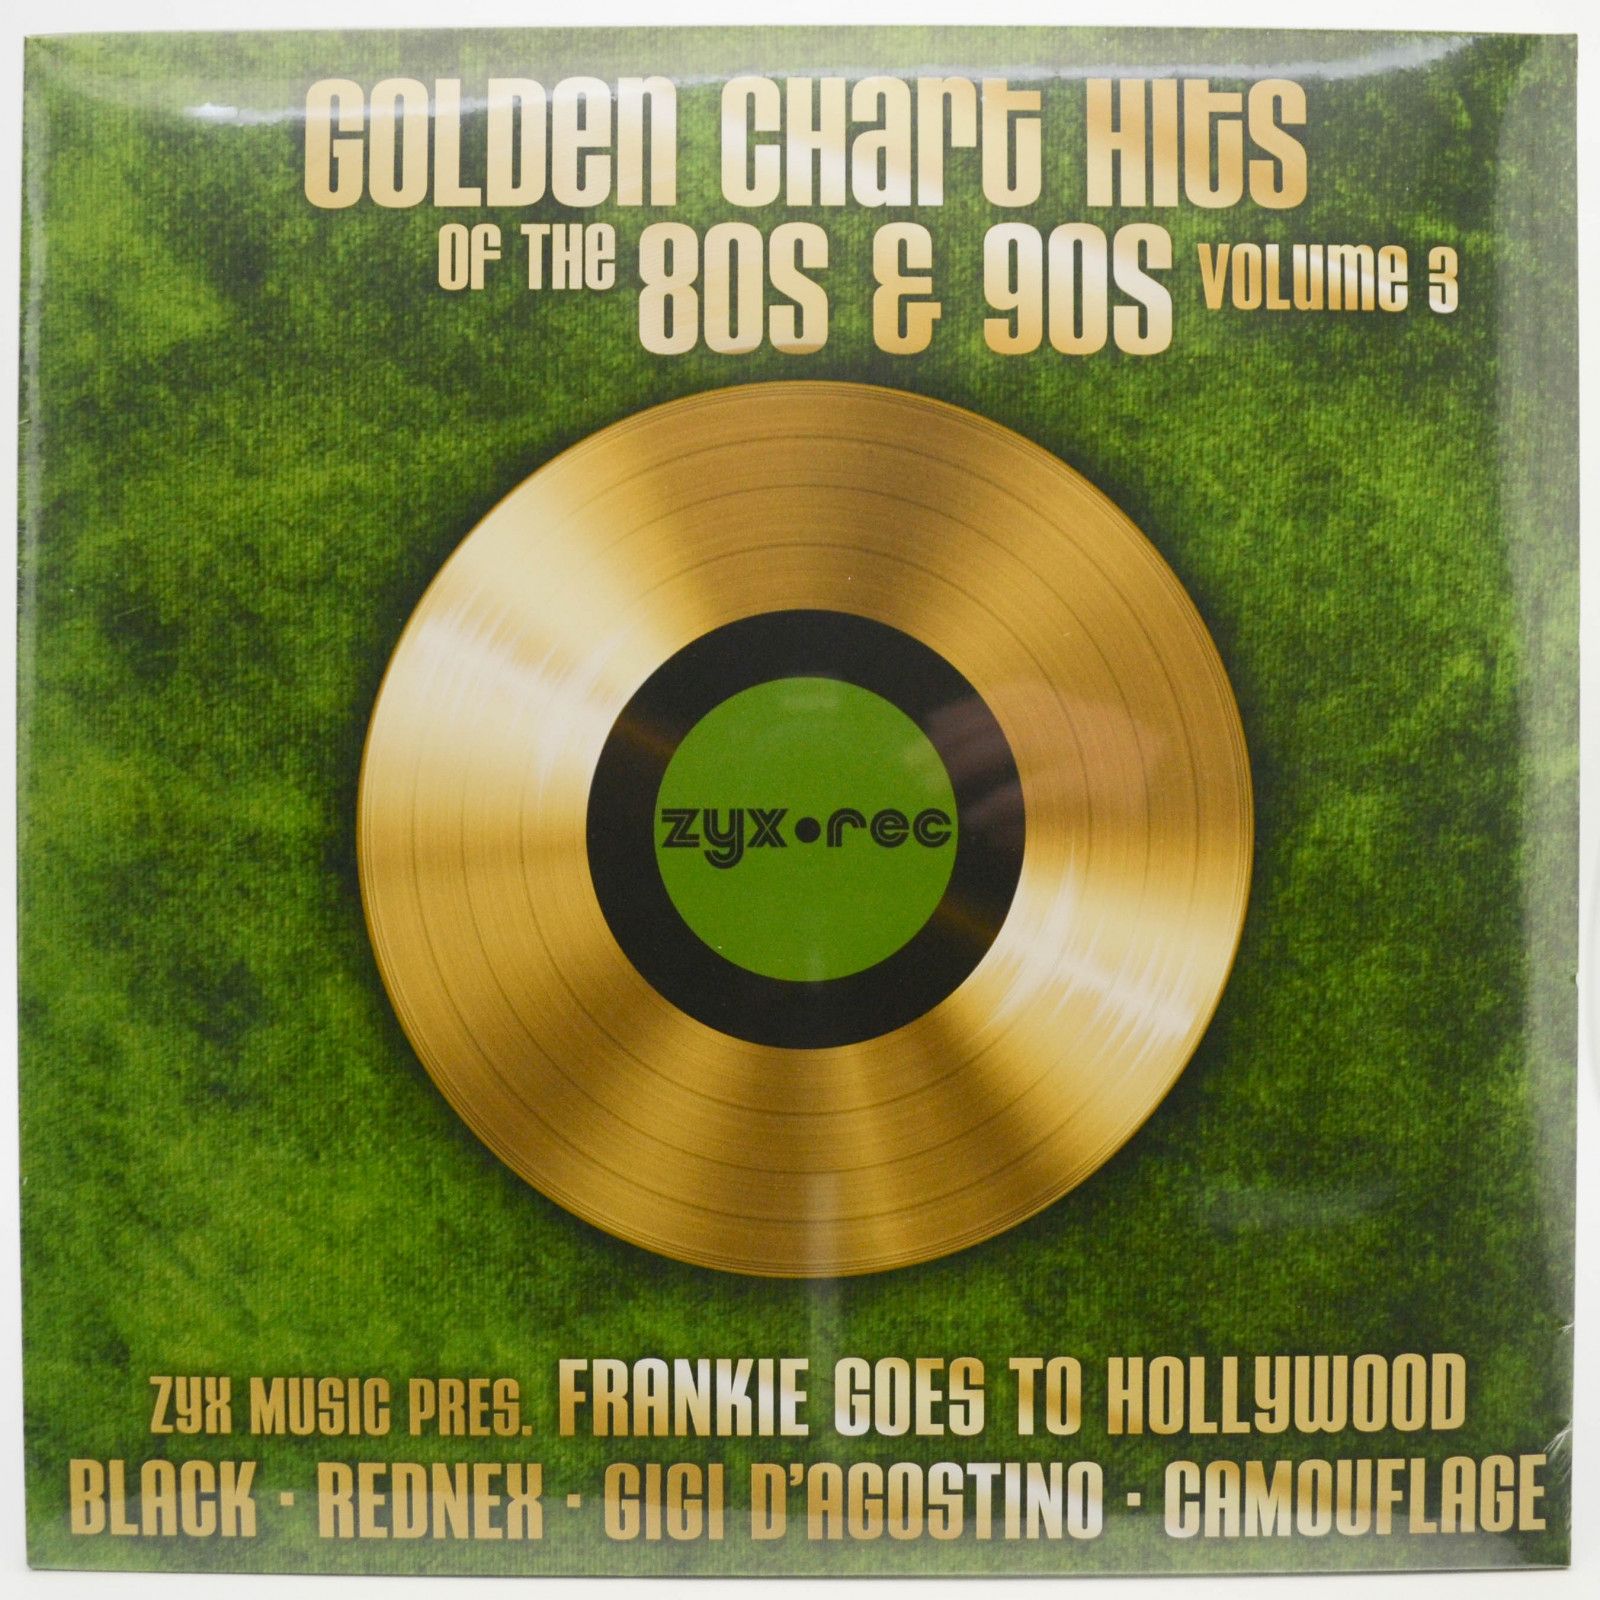 Various — Golden Chart Hits Of The 80s & 90s Volume 3, 2022